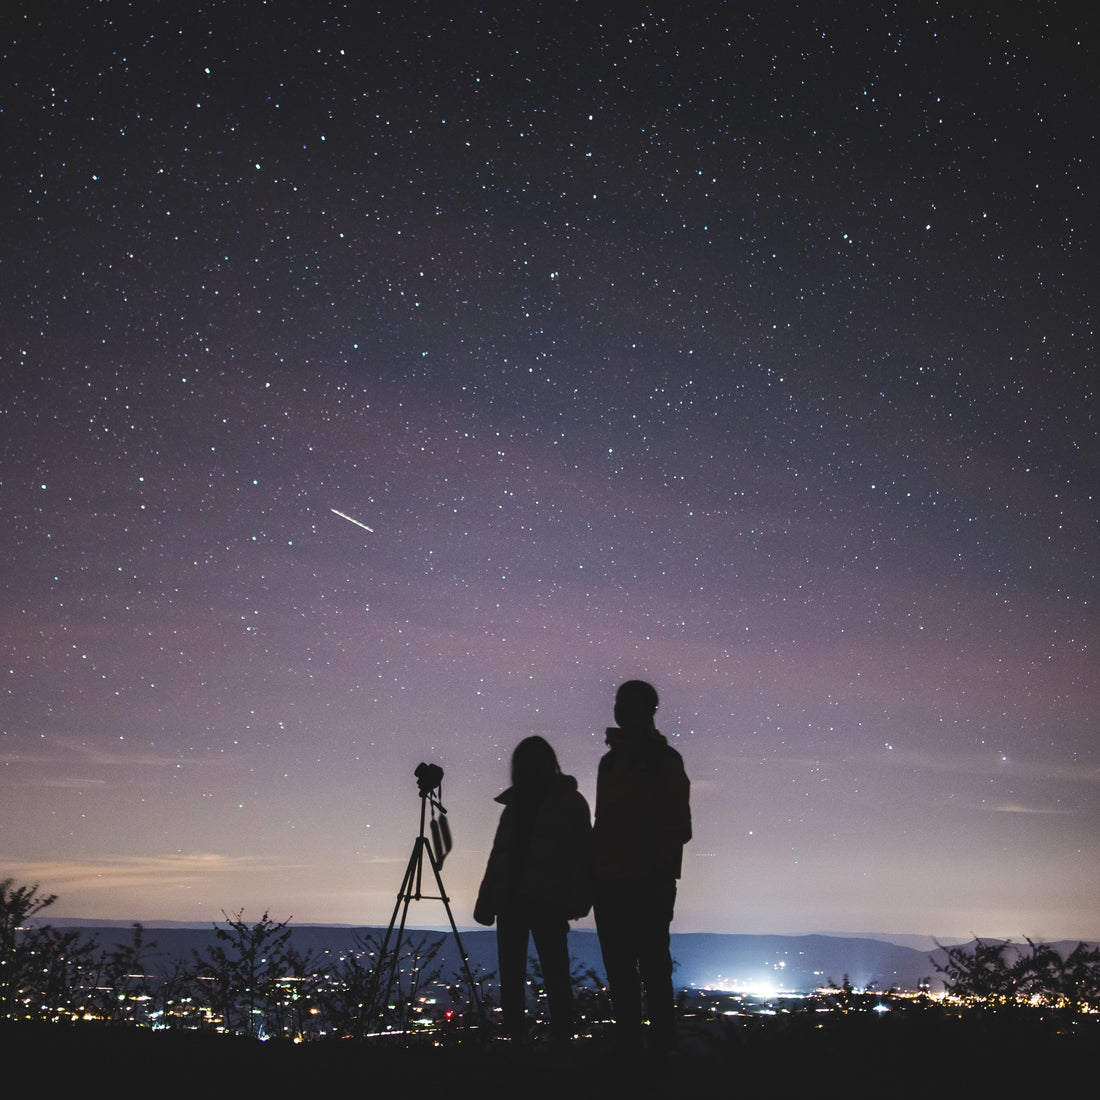 Introduction to Astrophotography: Capturing the Beauty of the Night Sky